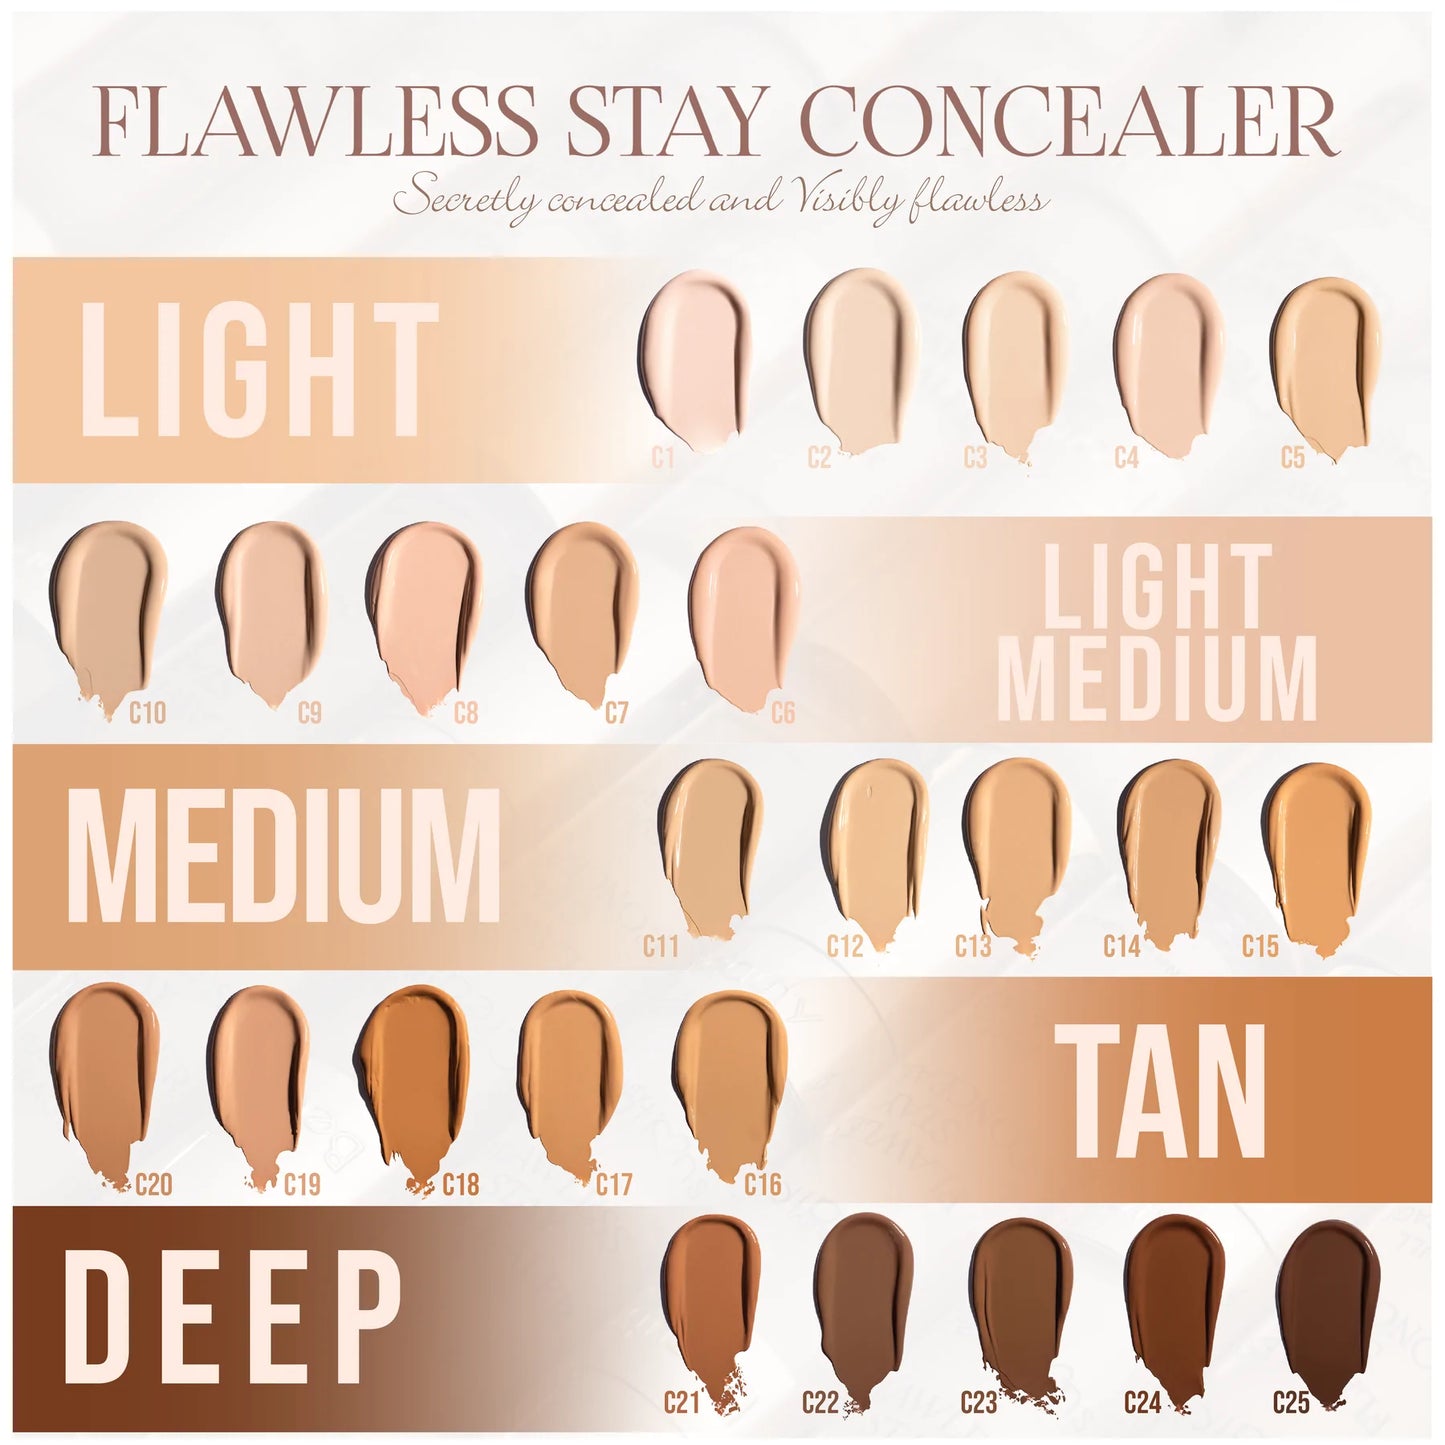 #C24 - Flawless Stay Concealer